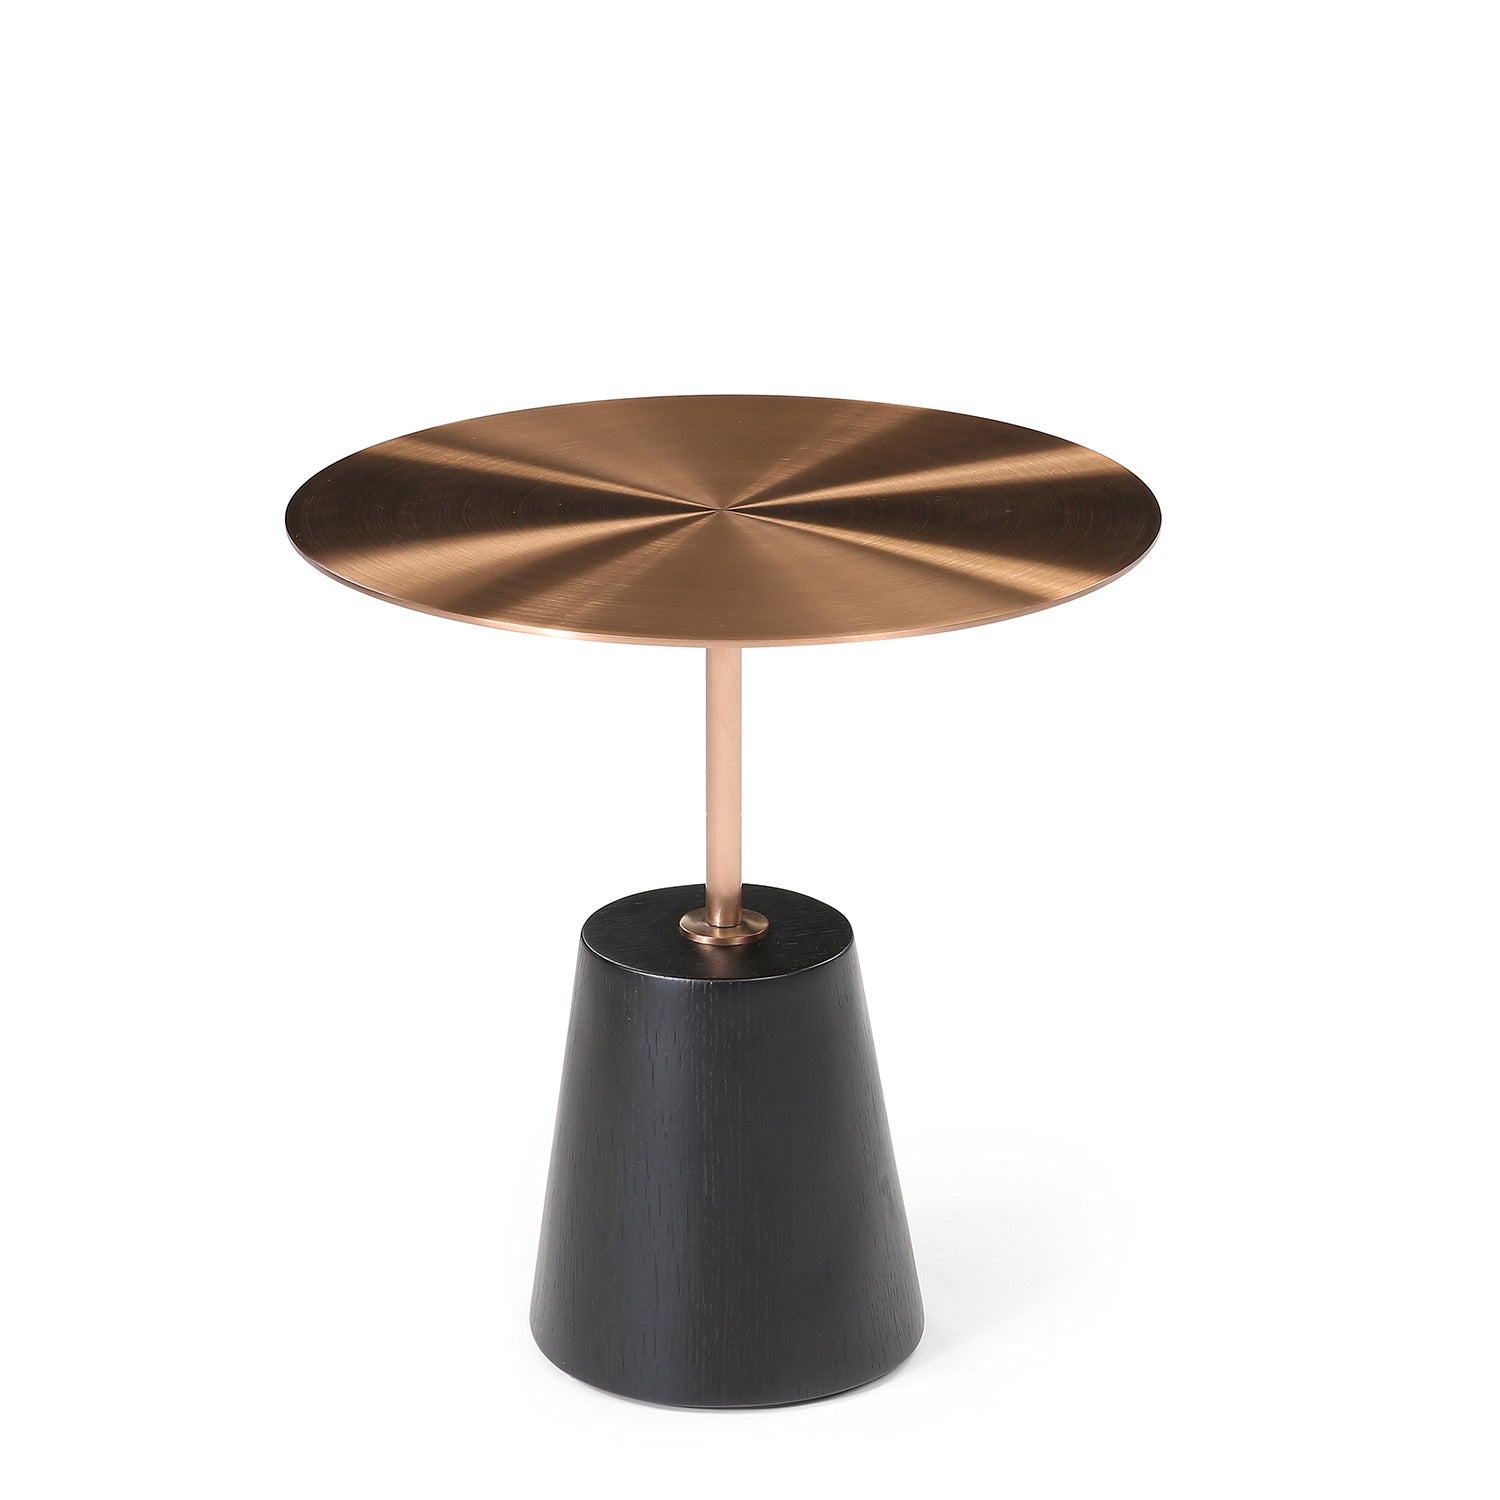 Ardenza side table